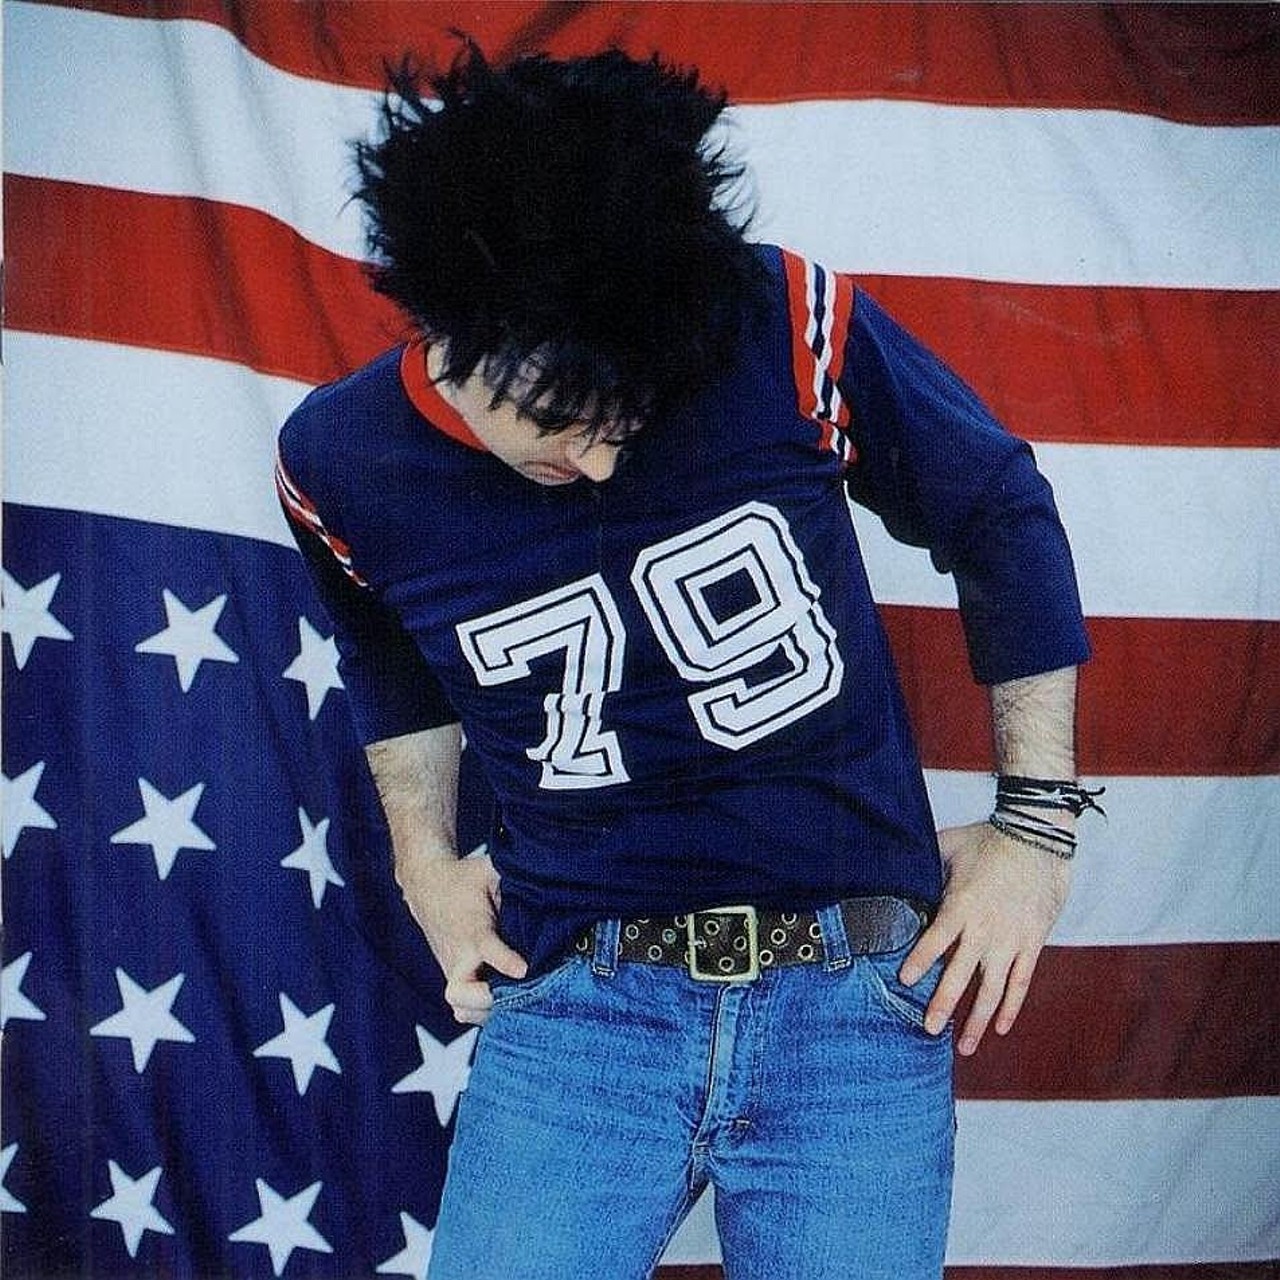 Ryan Adams - Gold (2001)
Despite the fact the album cover features Ryan Adams in front of an upside flag, it's a surprisingly America-friendly record. "When the Stars Go Blue," has been covered by a wide range of artists, from Tim McGraw to Bono and "New York, New York," the album's opening track, was a post-September 11 attacks favorite on number of stations.